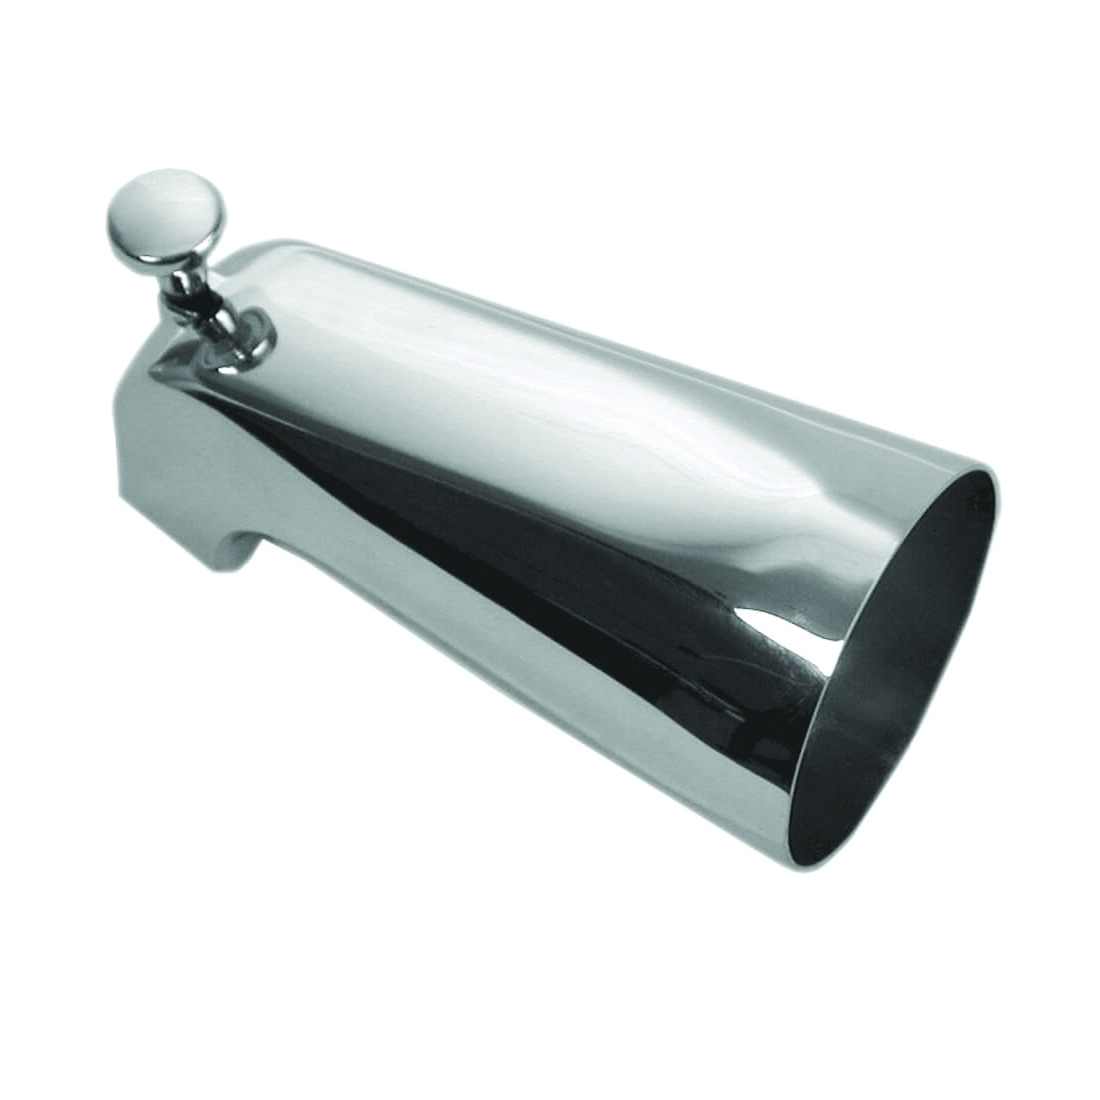 88052 Tub Spout with Front Diverter, Metal, Chrome Plated, For: 1/2 in IPS Threaded Connection